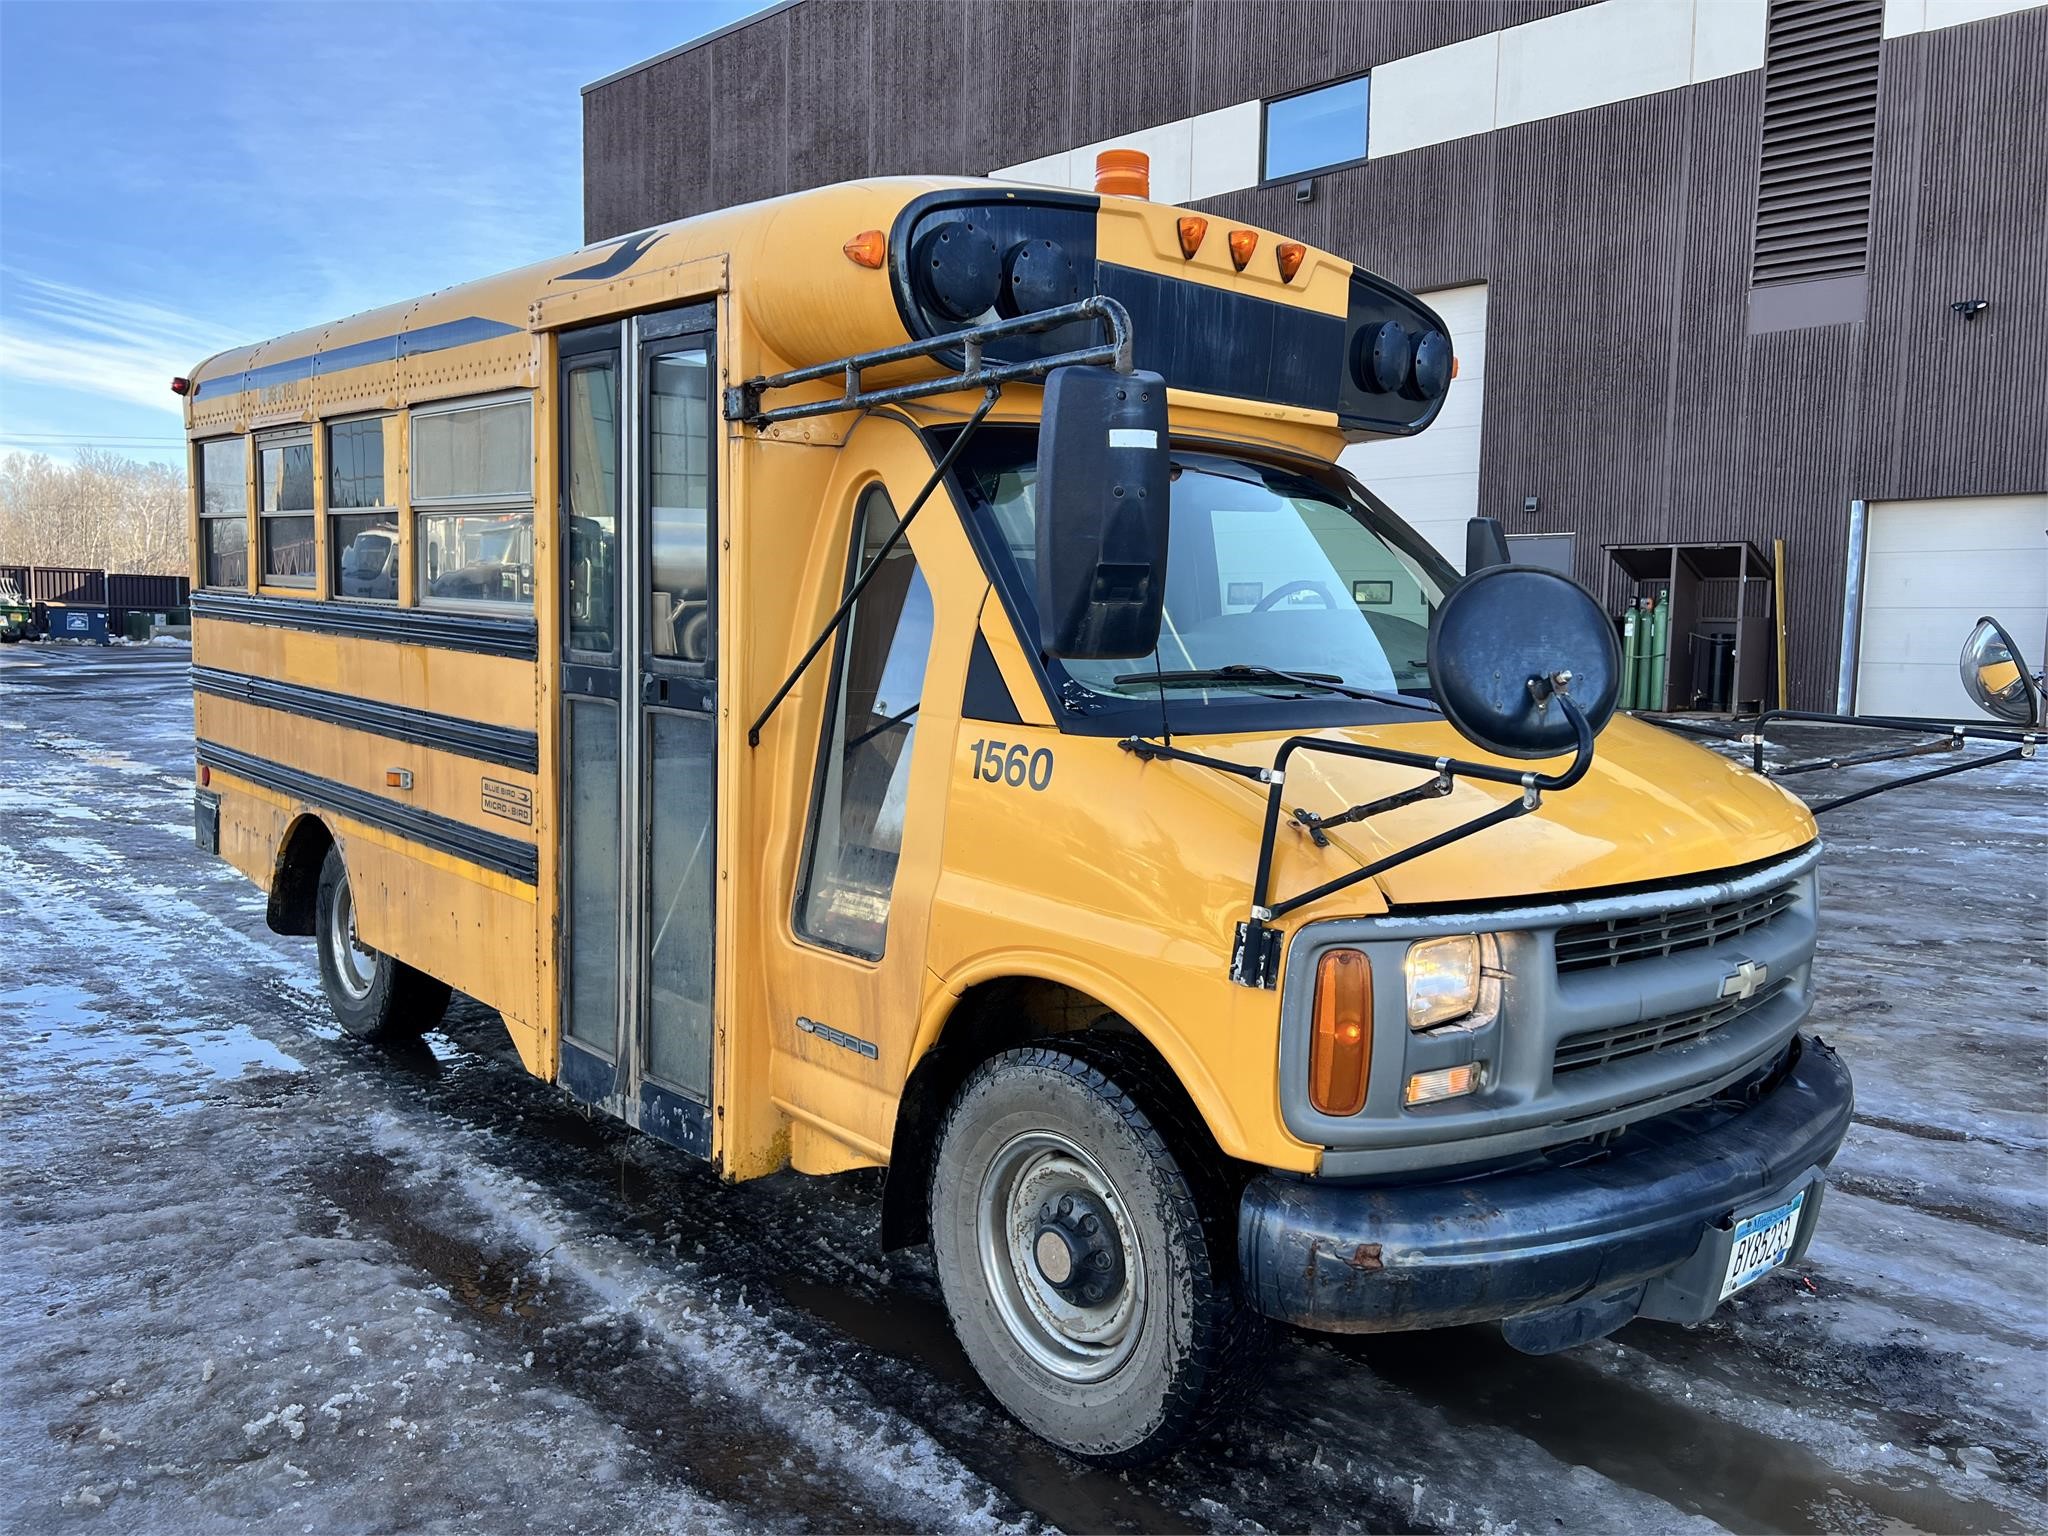 Shuttle Bus Auction Results